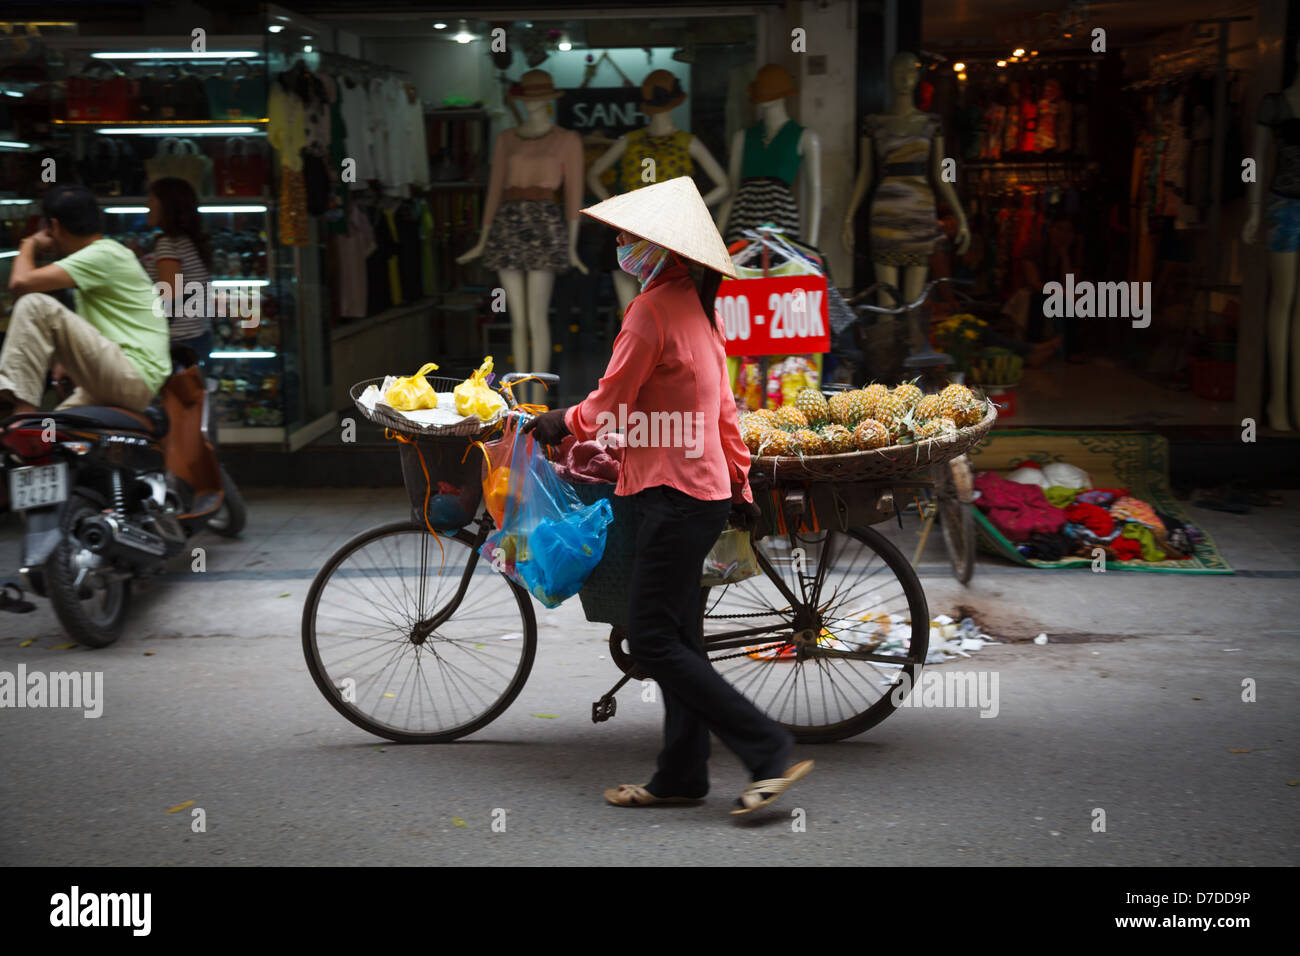 A lady selling pineapples from her bicycle in the Old Quarter of Hanoi Stock Photo